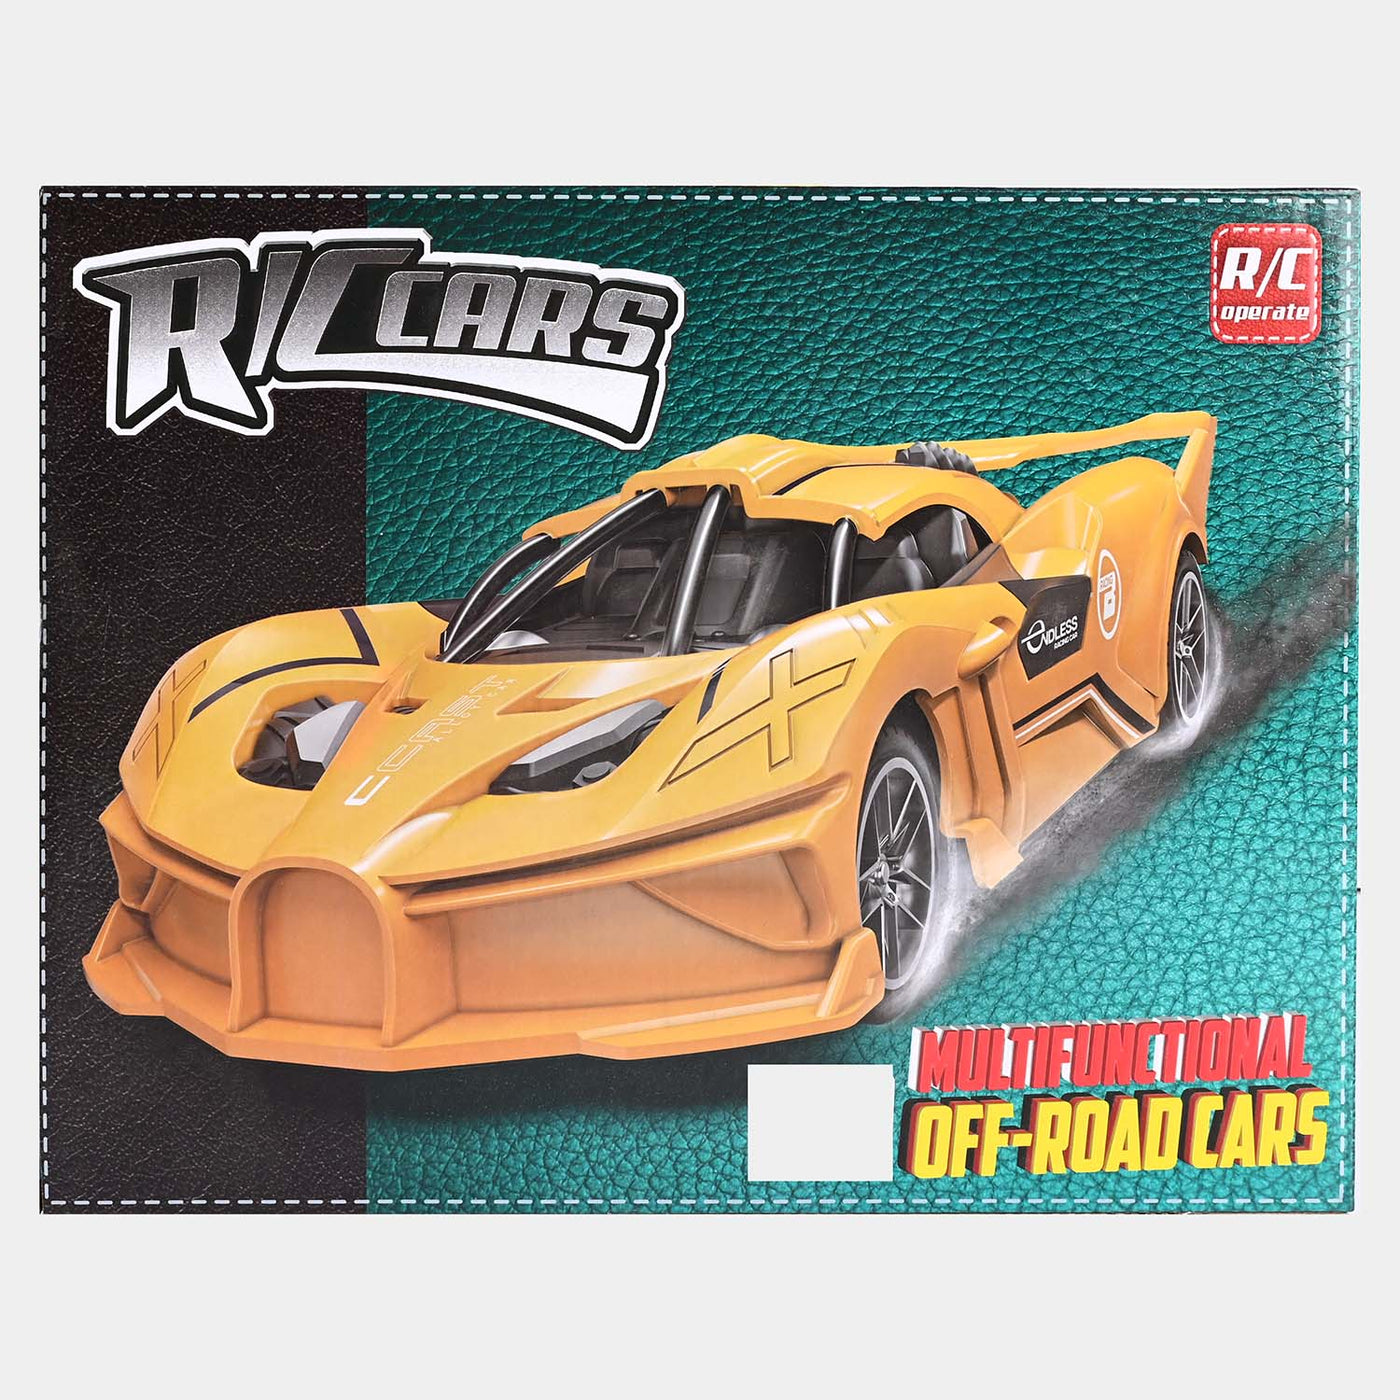 Remote Control Racing Car For Kids